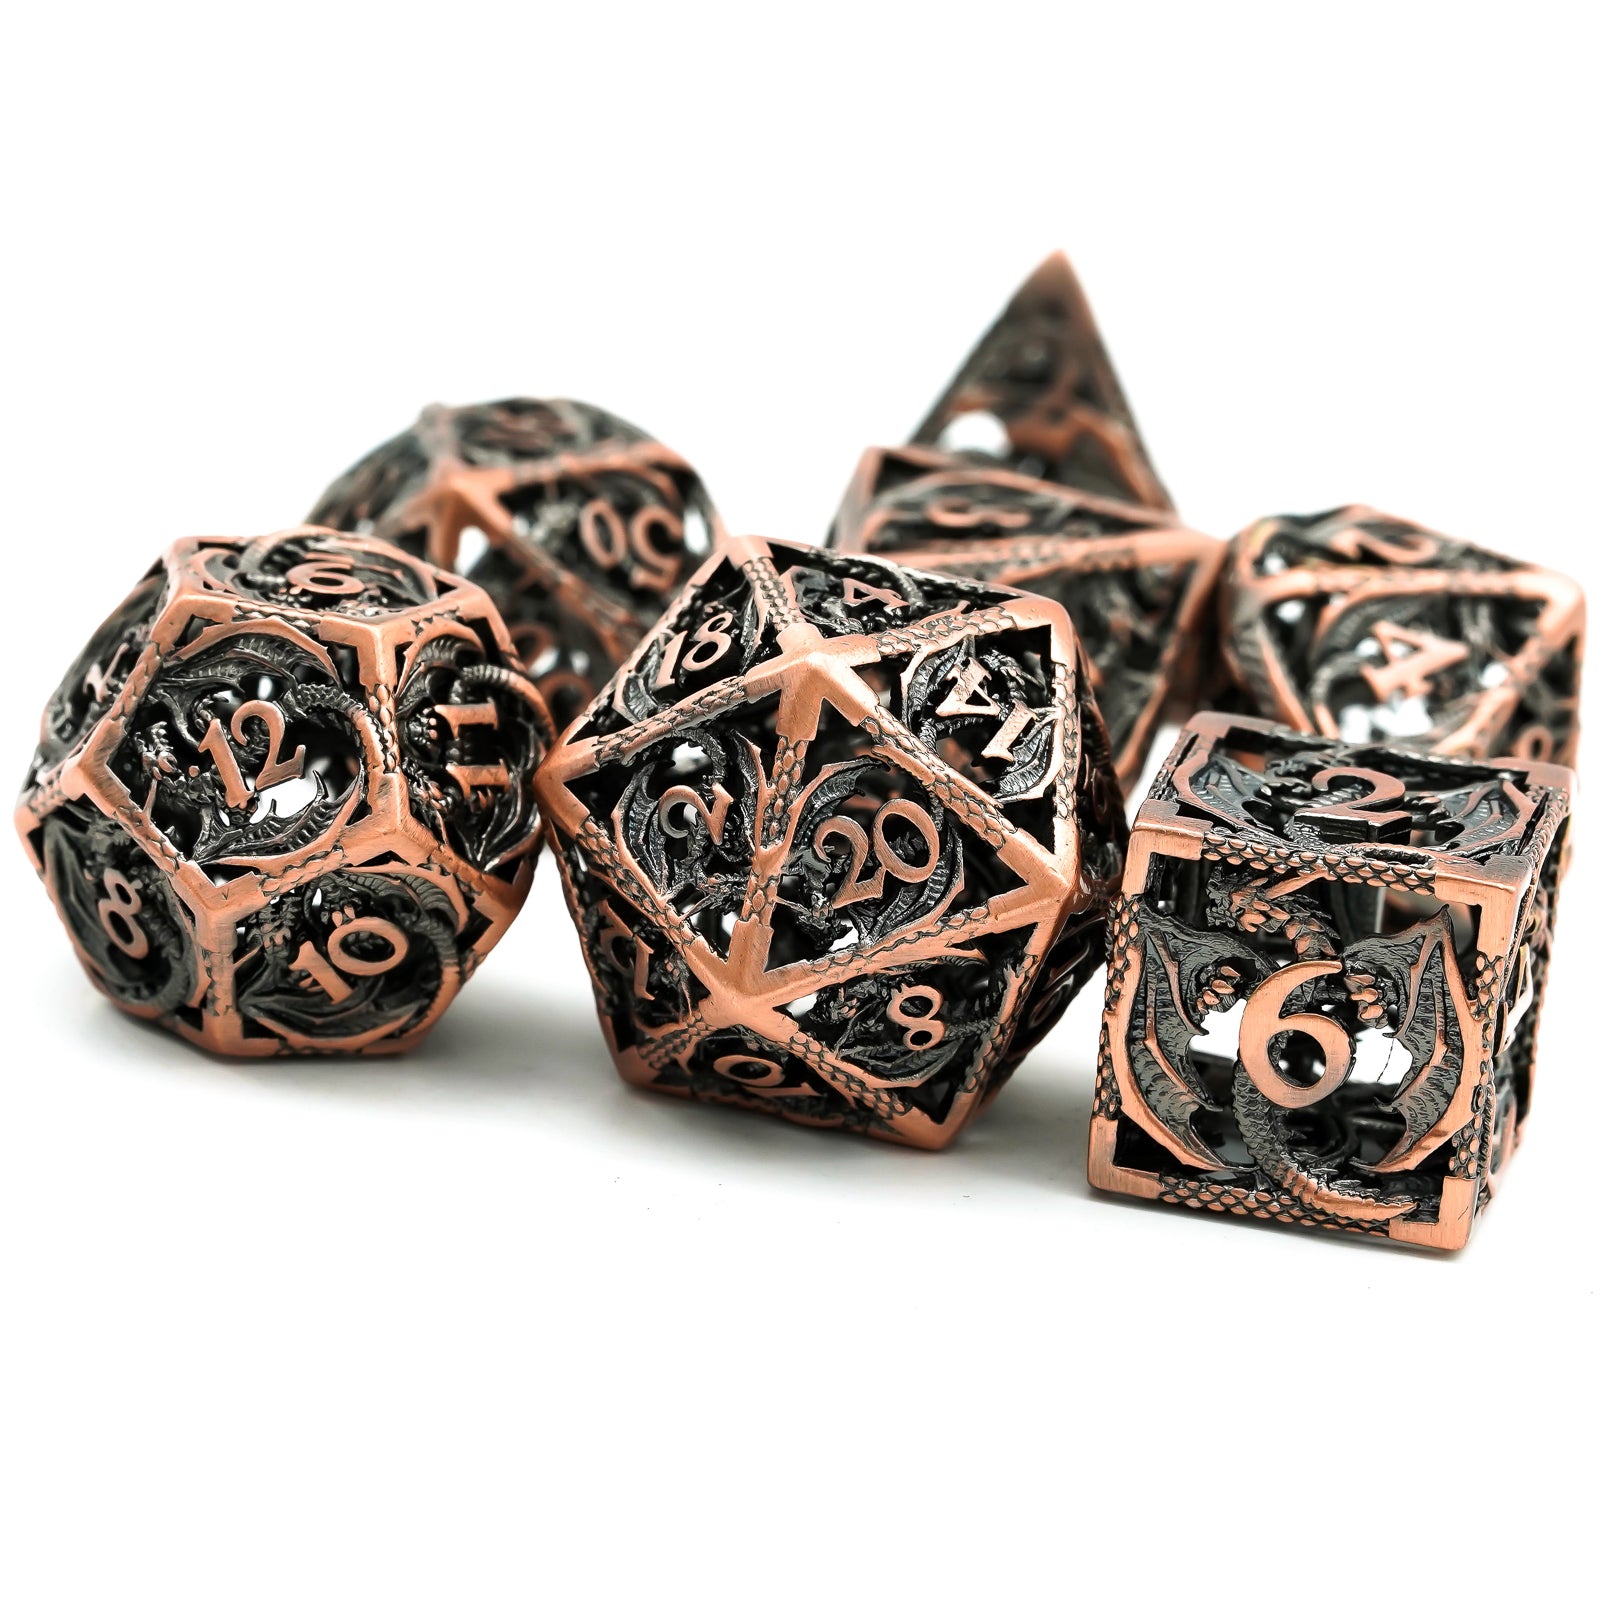 beutiful bronze trimmed hollow metal dice with dark dragons worked into the metal